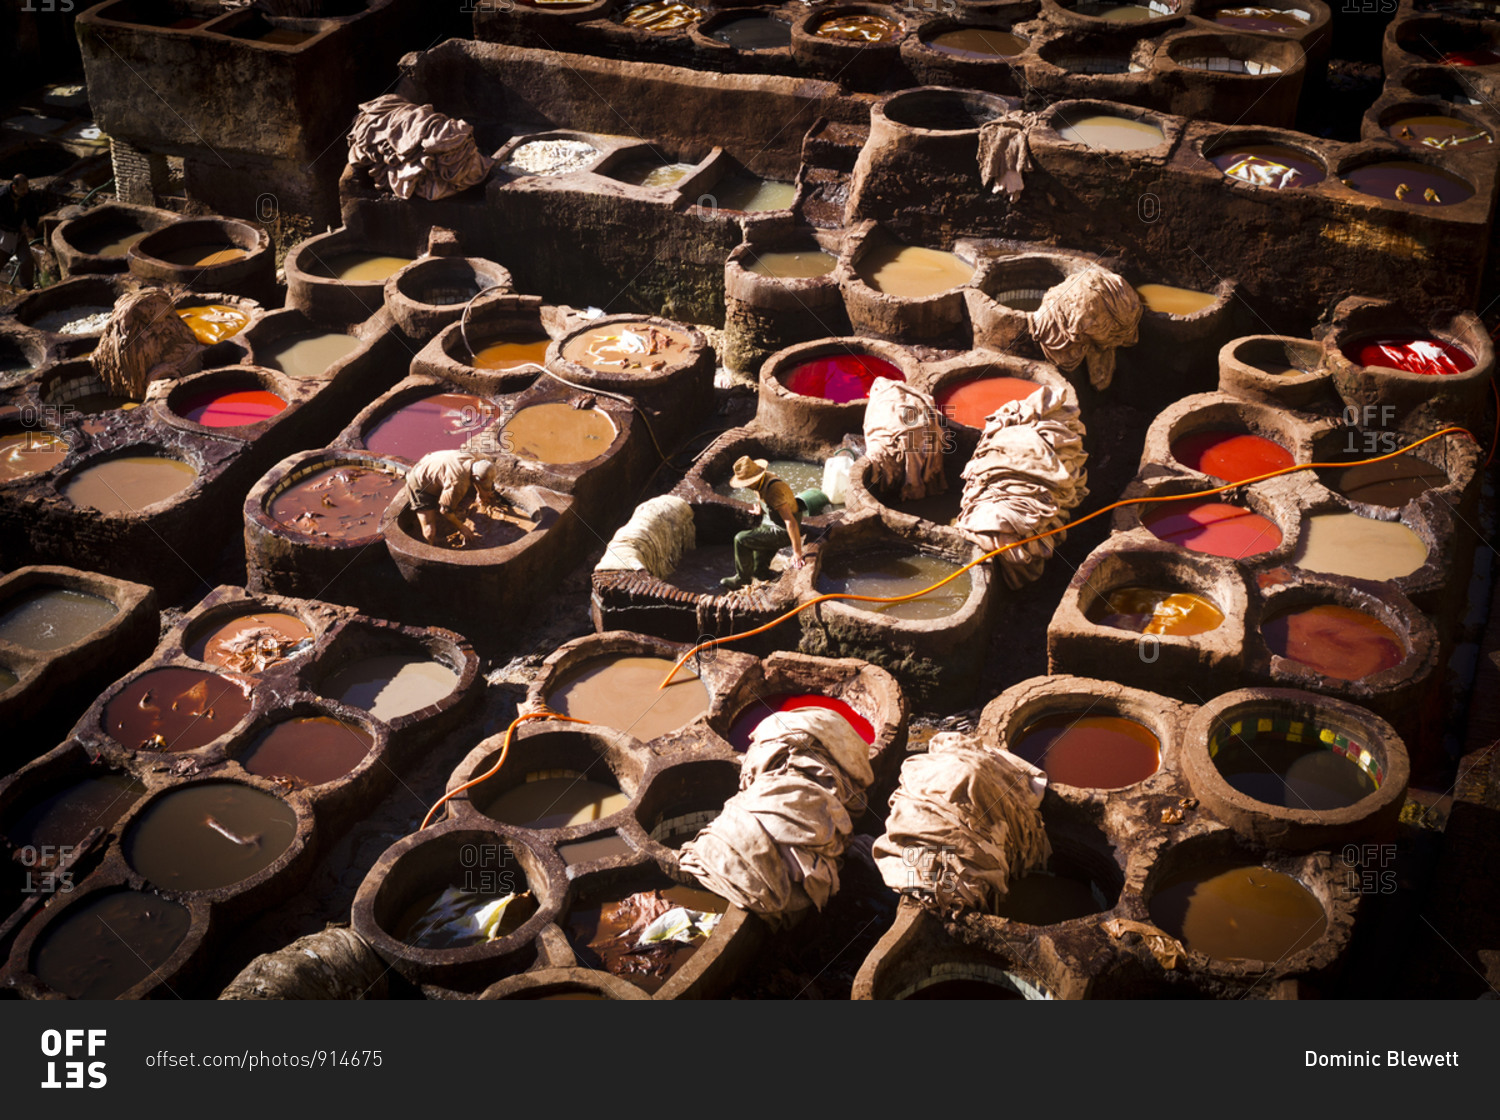 Workers tanning leather in pots of dye in the Tanners Quarter of Fes, Morocco